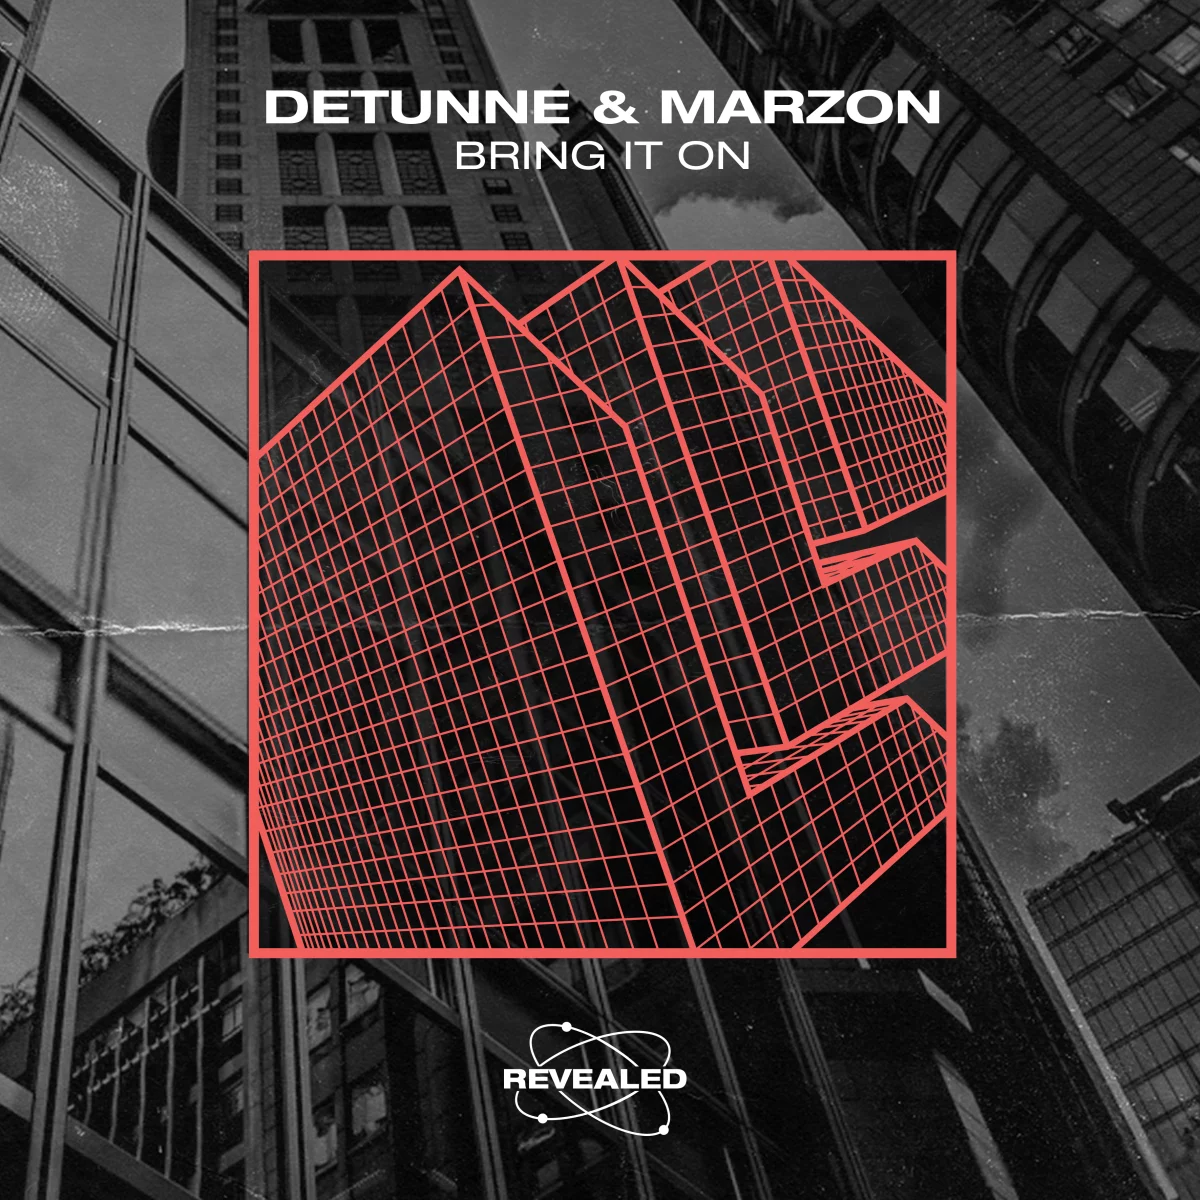 Bring It On - Detunne⁠ & Marzon⁠ 